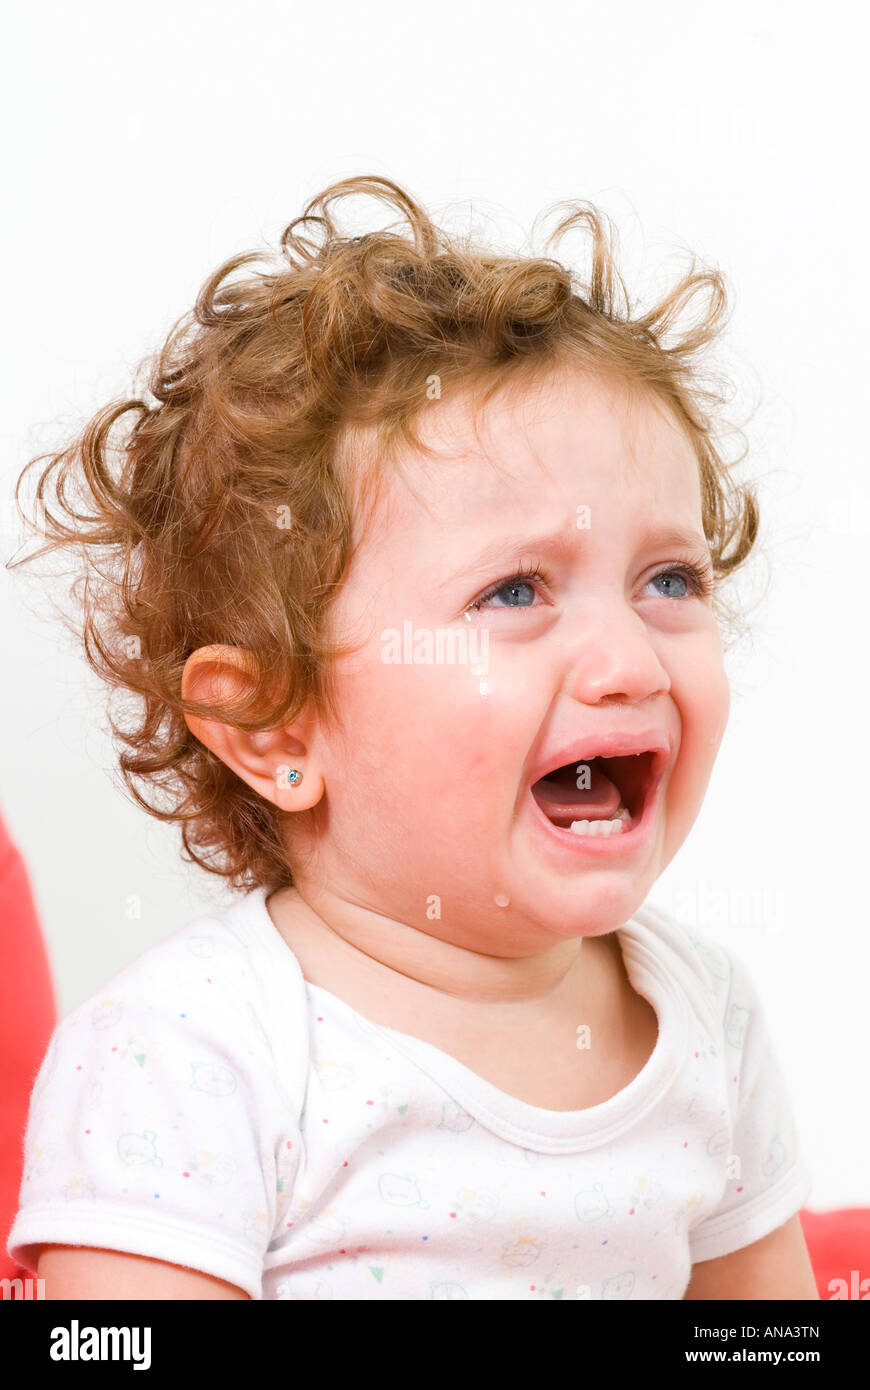 Portrait of a baby girl crying Banque D'Images